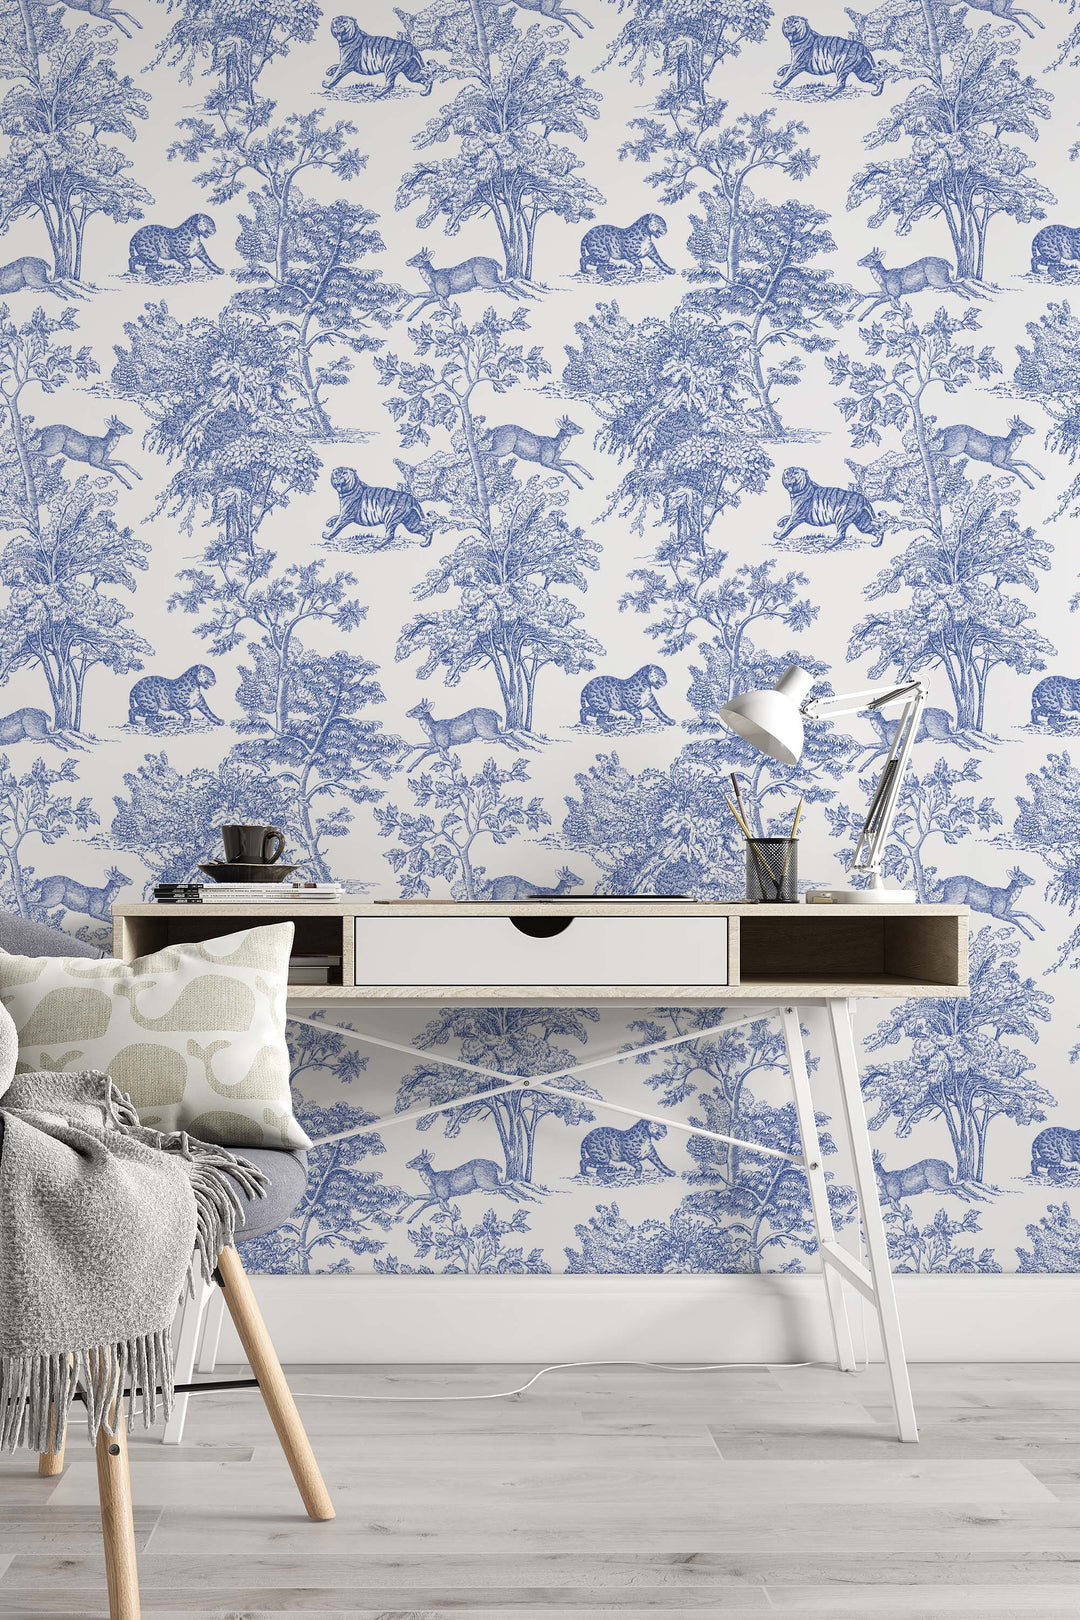 Blue tigers and deer on a white background  pattern, peel and stick wallpaper, wall decor design#3266